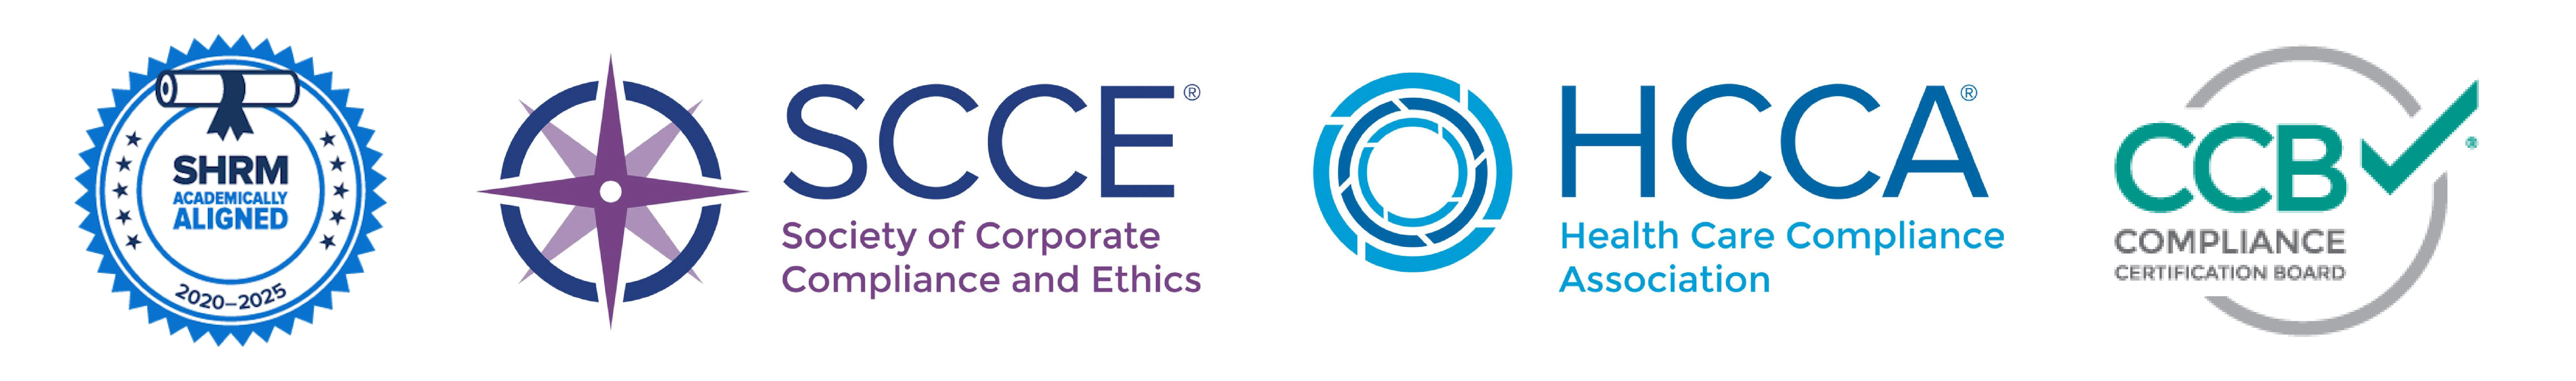 Four logos in order from left to right: The Society for Human Resource Management (SHRM), Society of Corporate Compliance and Ethics (SSCE), Health Care Compliance Association (HCCA), and Compliance Certificate Board (CCB)